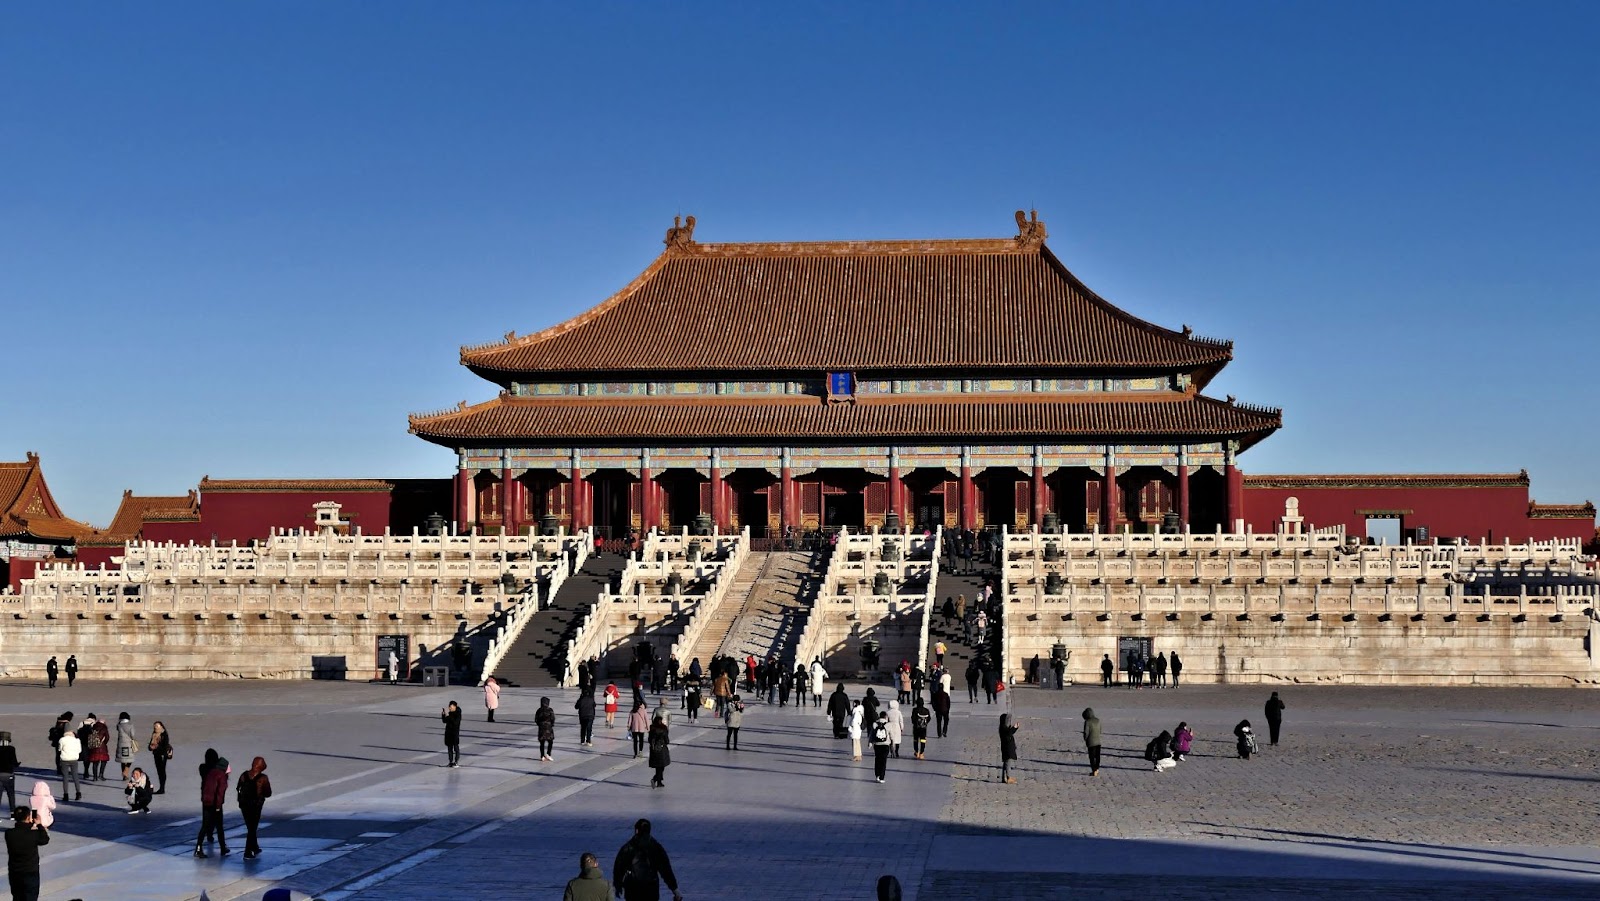 The Forbidden City, China - 23 Top Sights to See Before You Die